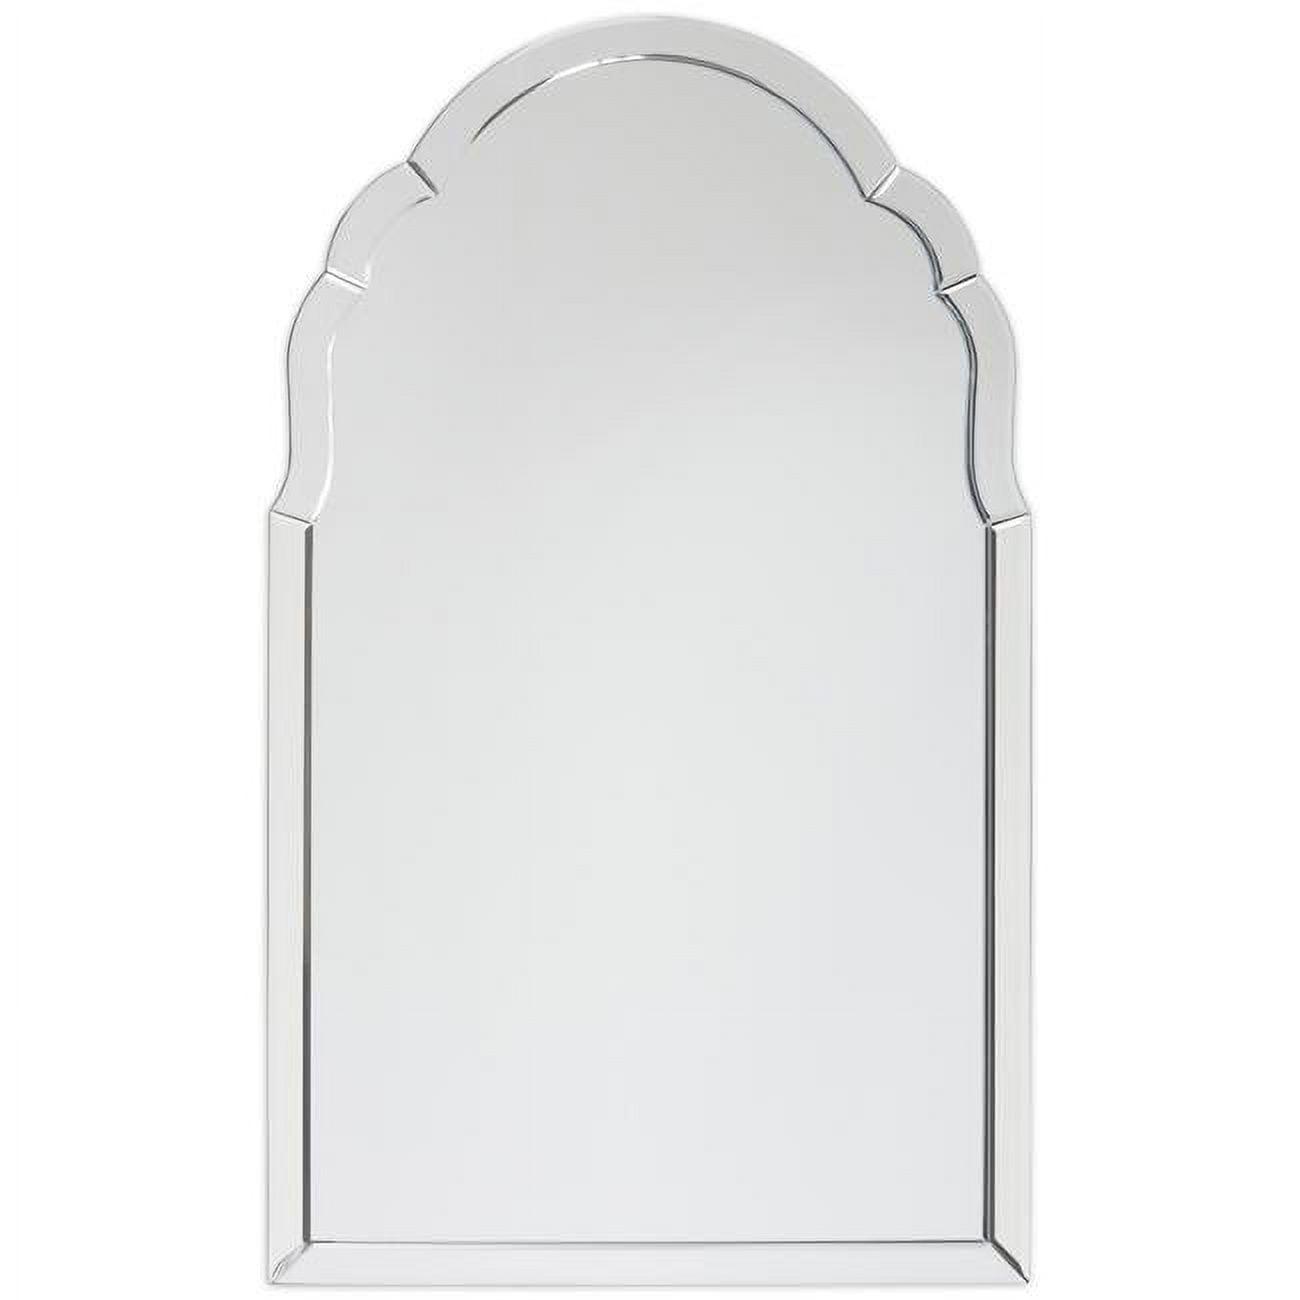 Contemporary Clear Beveled 24" x 40" Wall Mirror